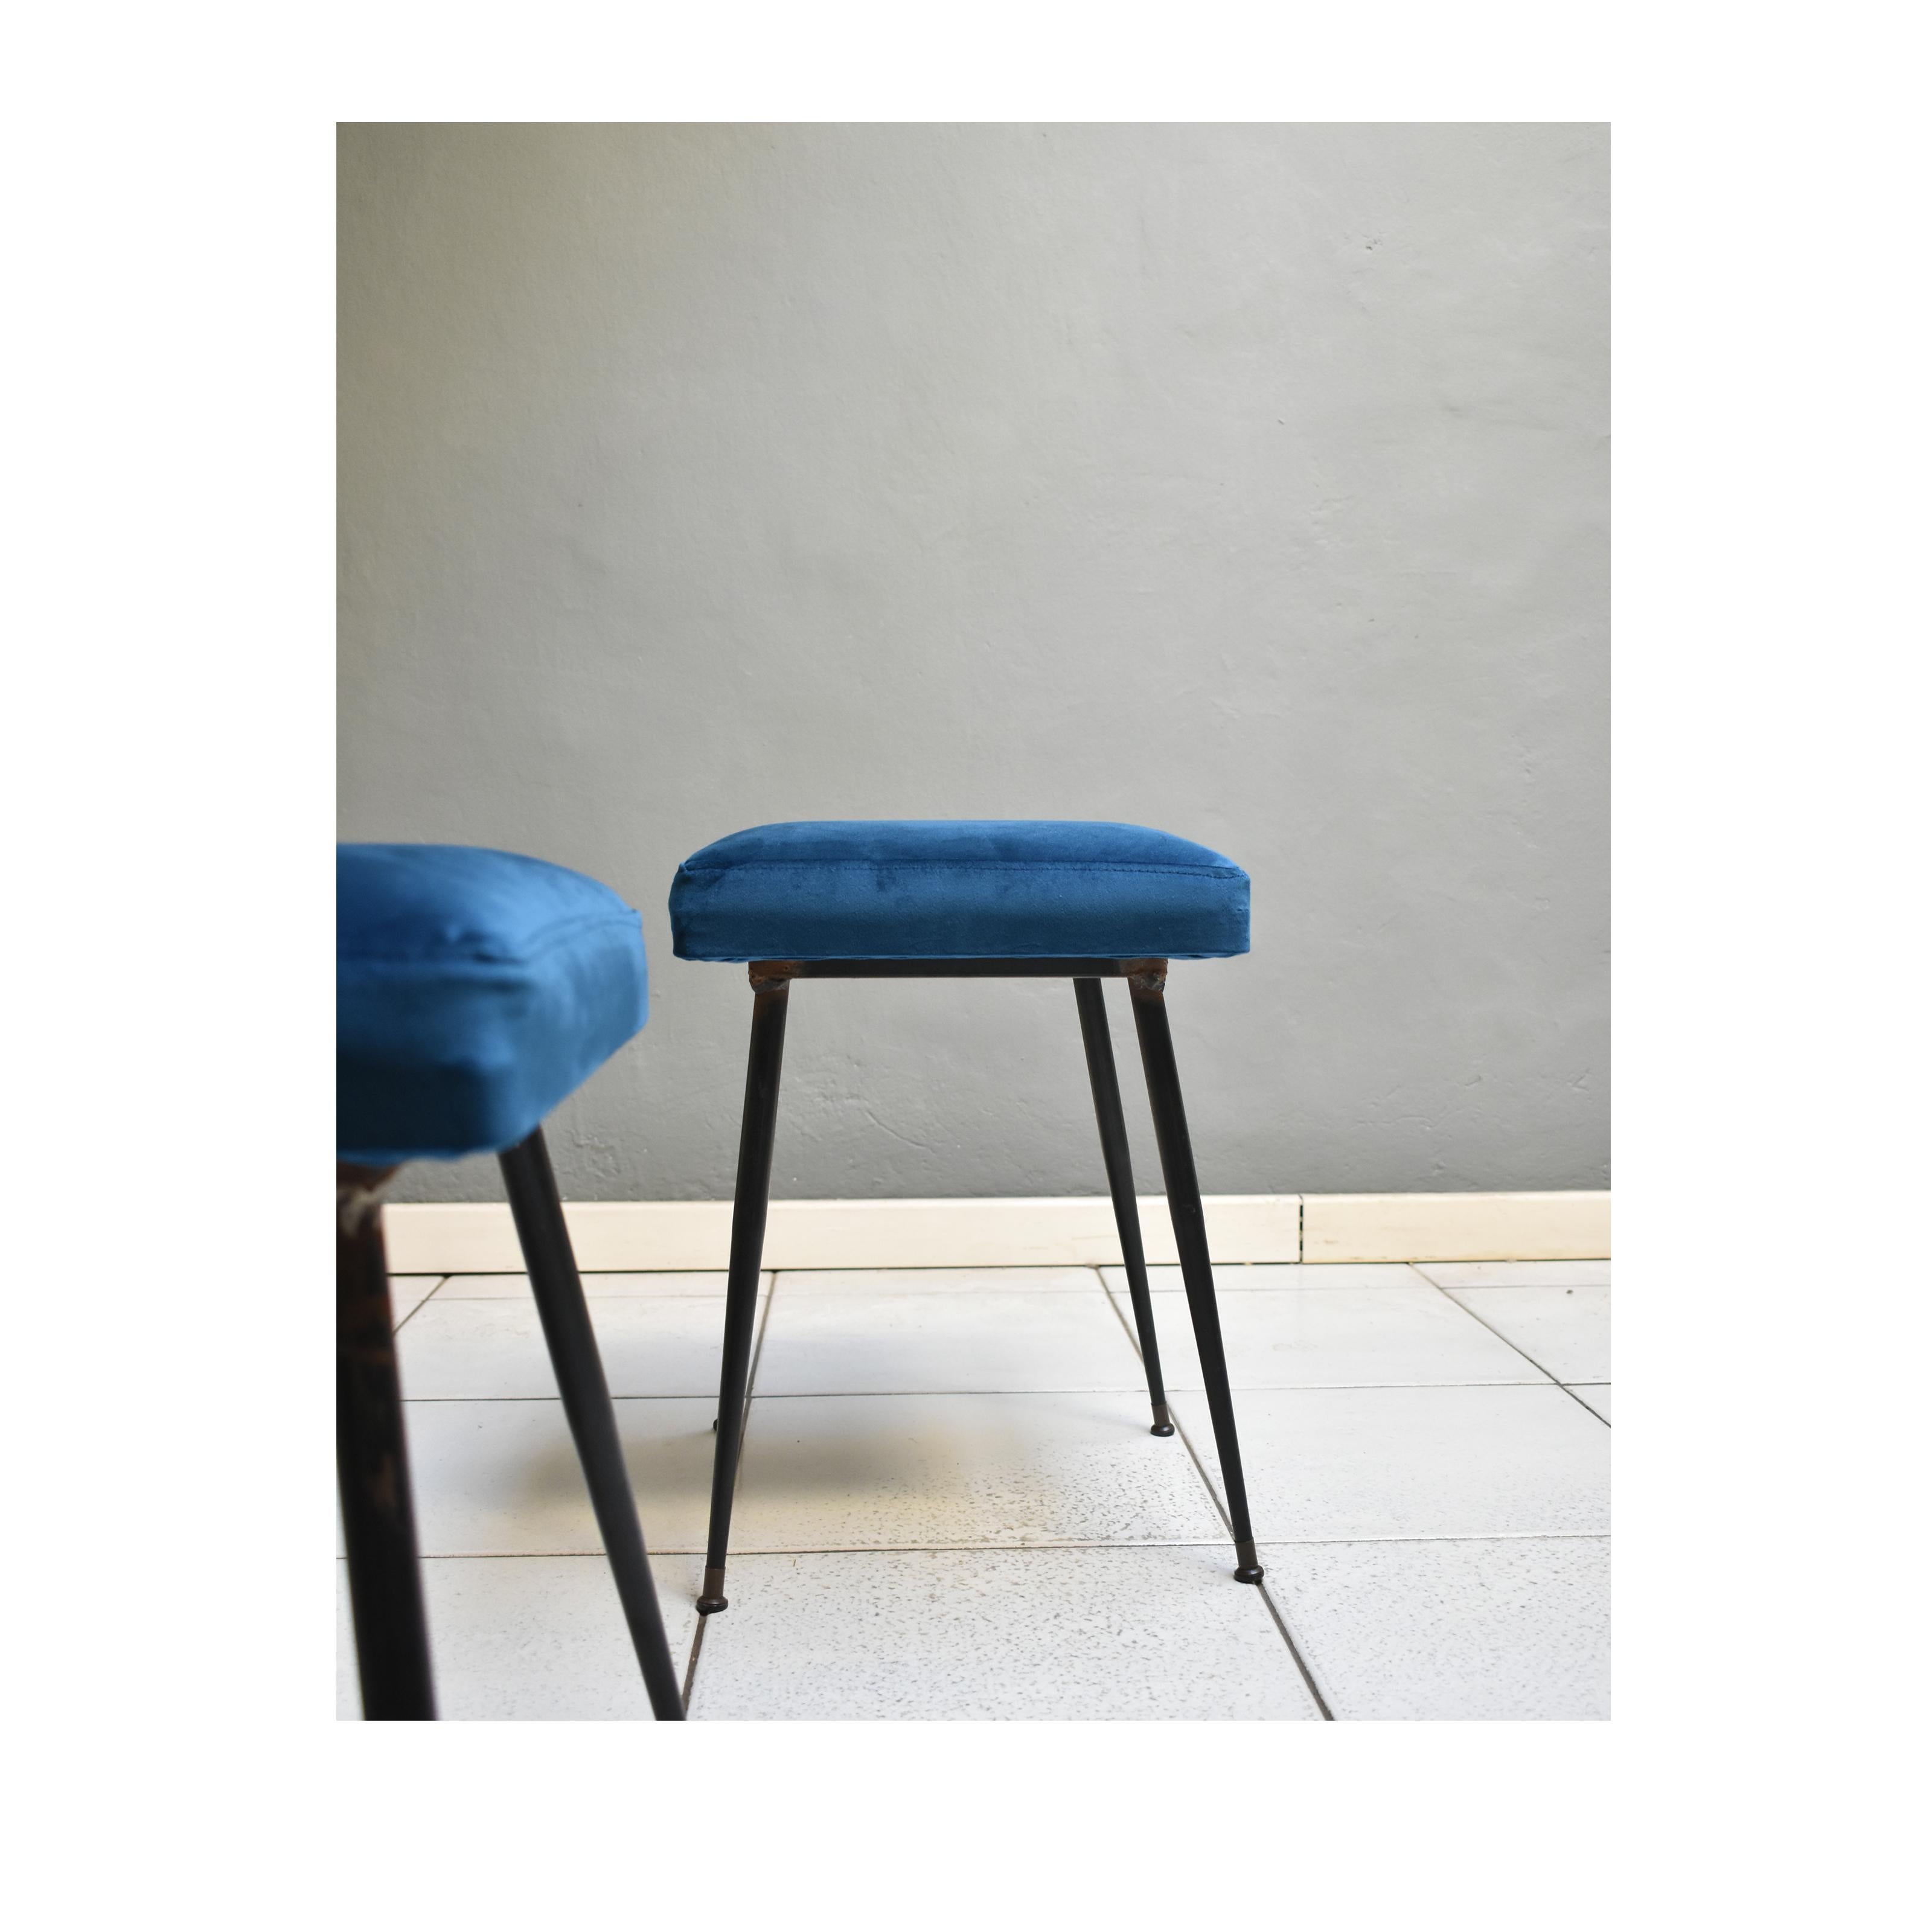 Set of Two Poufs 60s Stools, Brass Feet and Petroleum Blue Velvet Upholstery In Good Condition For Sale In Milan, IT